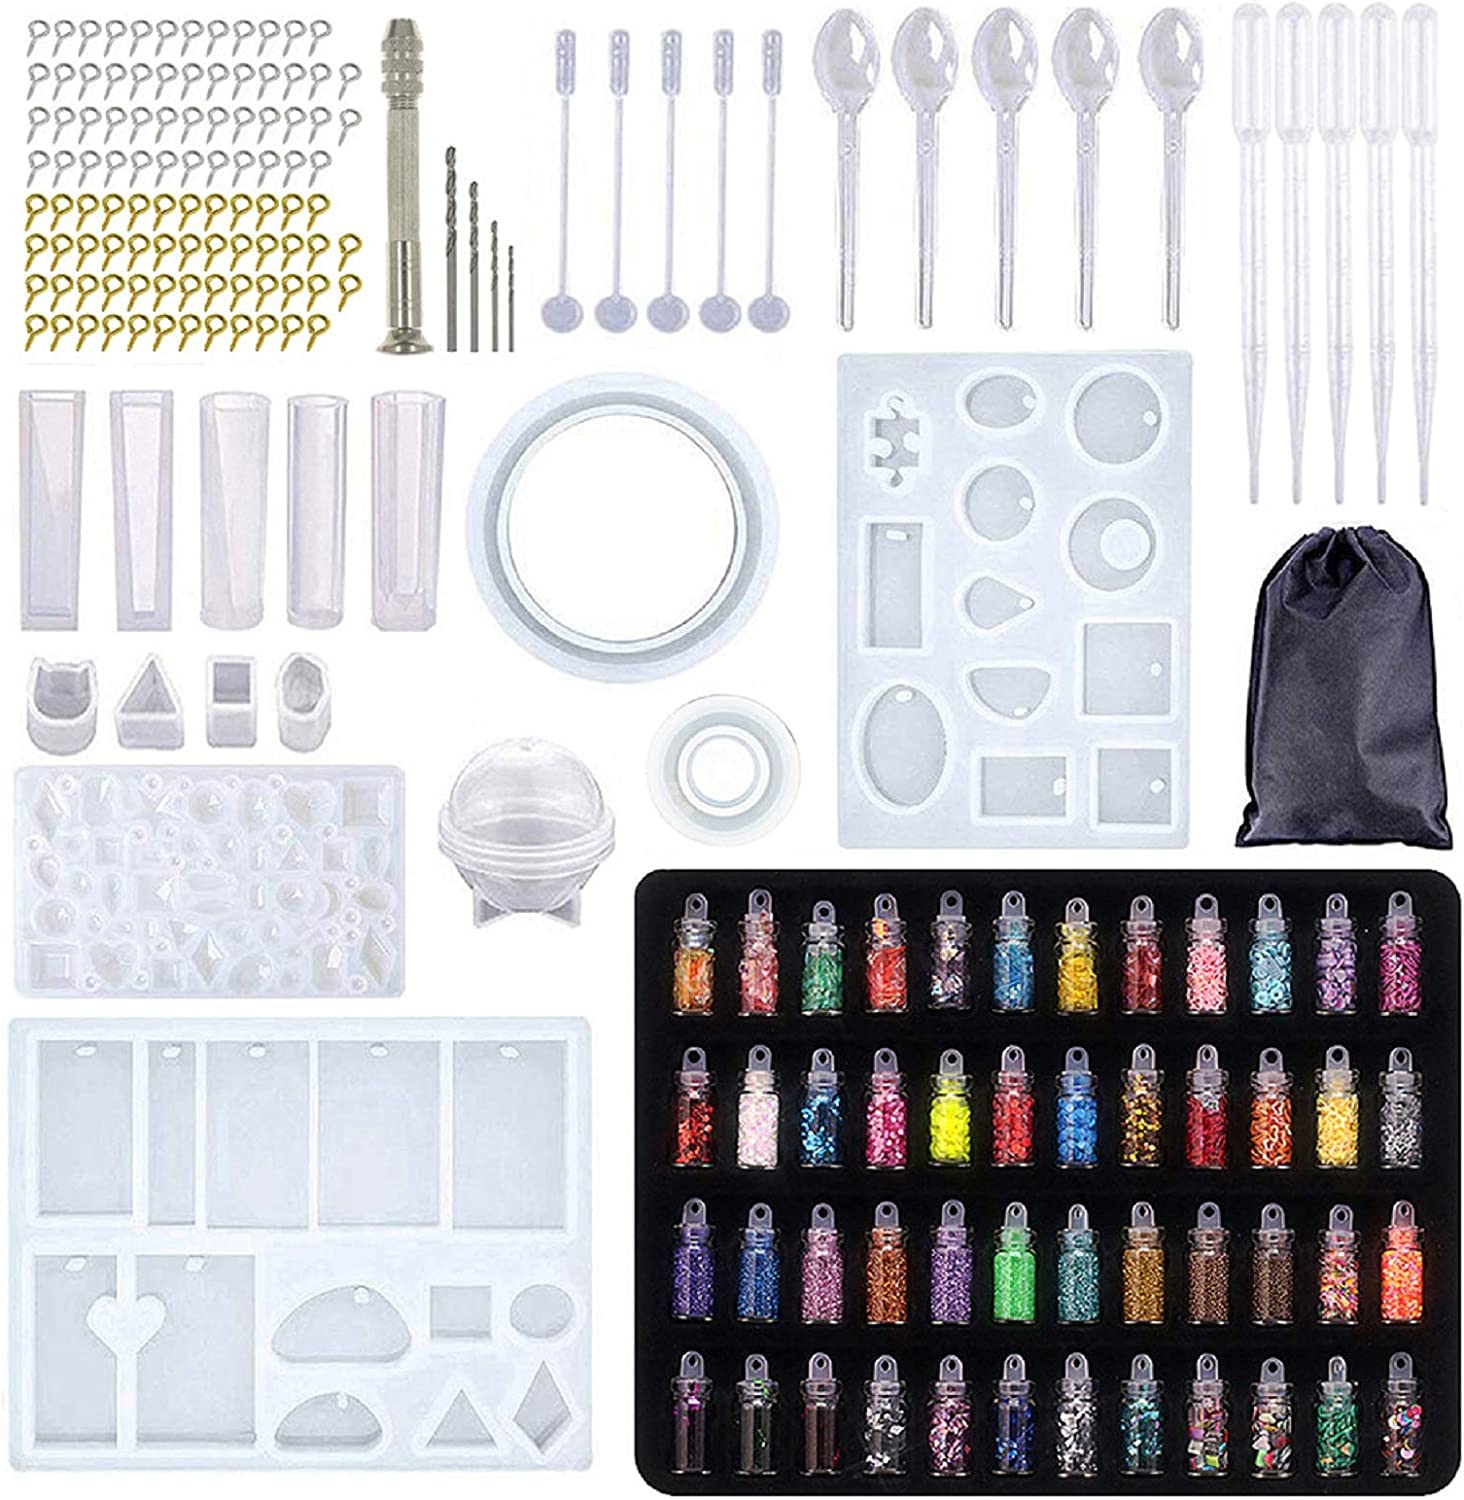 LET'S RESIN Resin Kits and Molds Complete Set, 16OZ Resin Molds